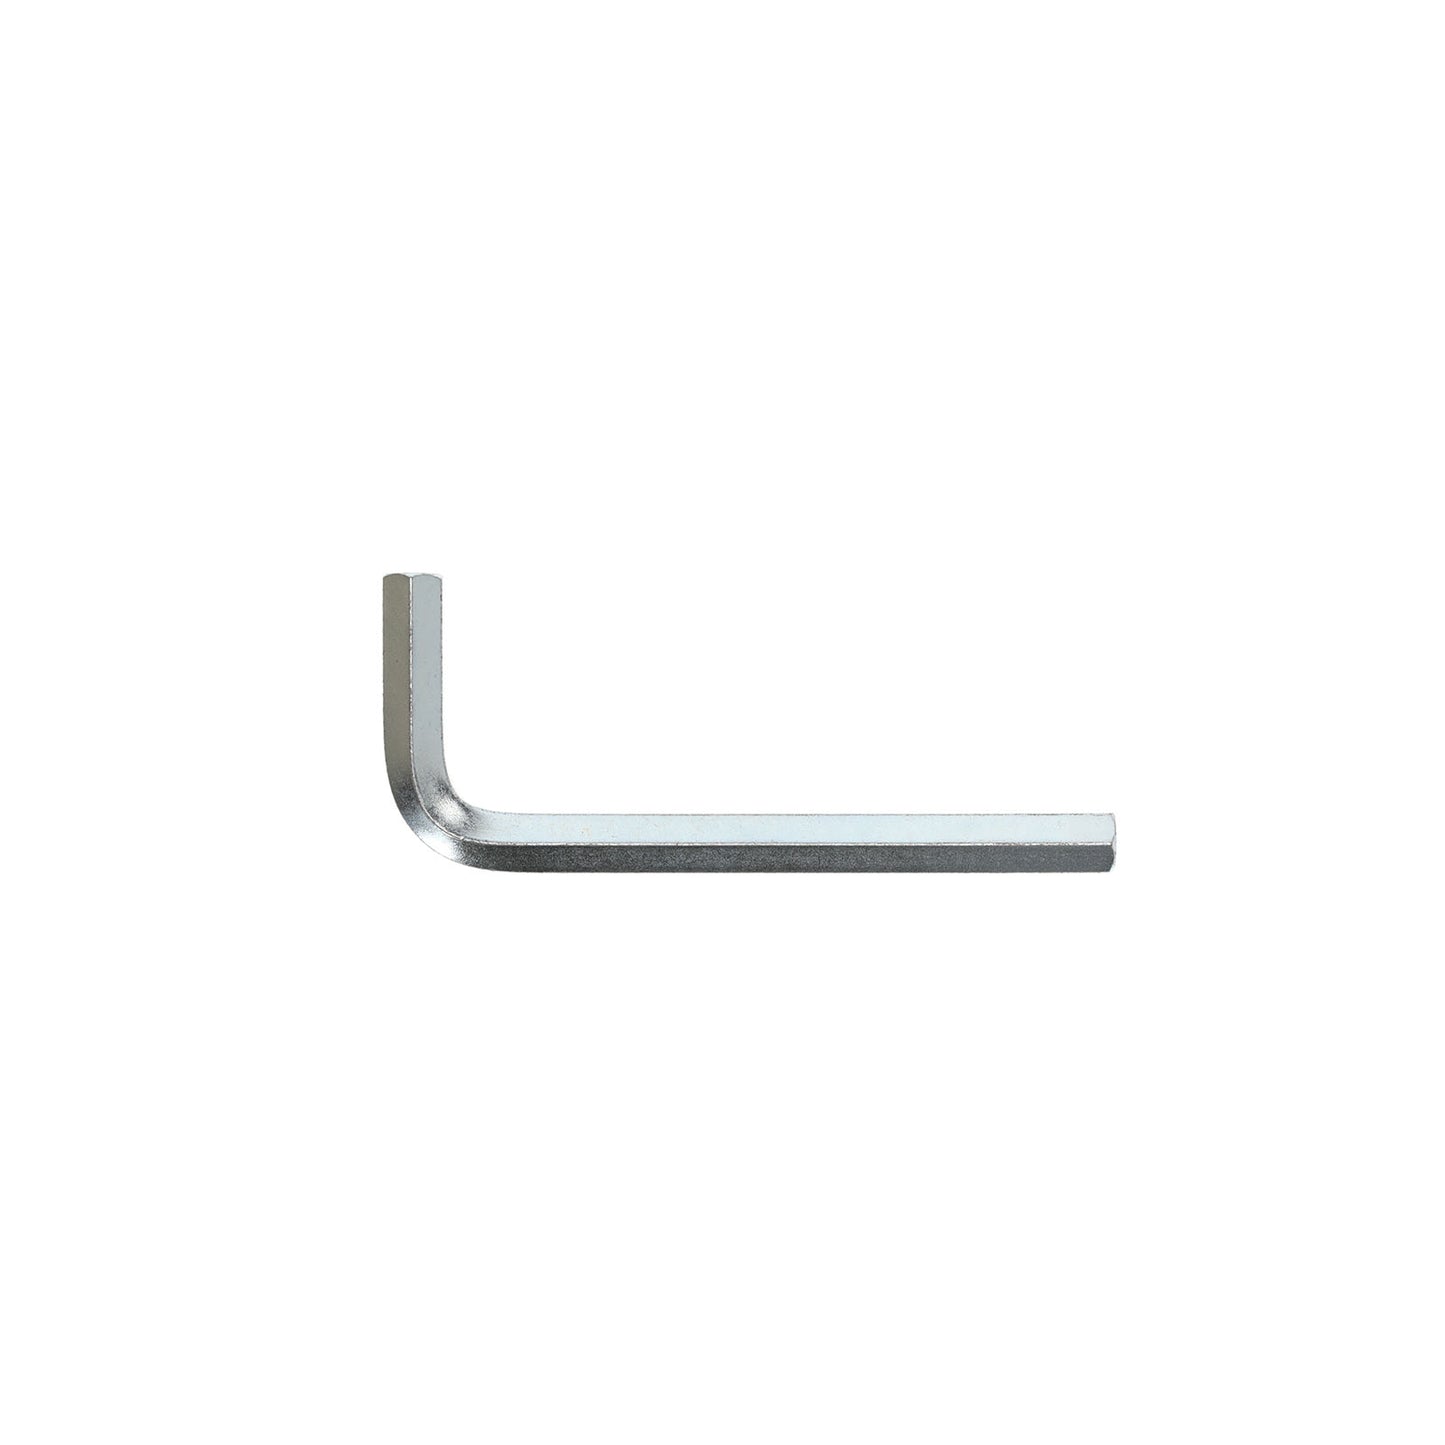 GEDORE 42 10 - Angled Allen Key 10 mm (6341230)